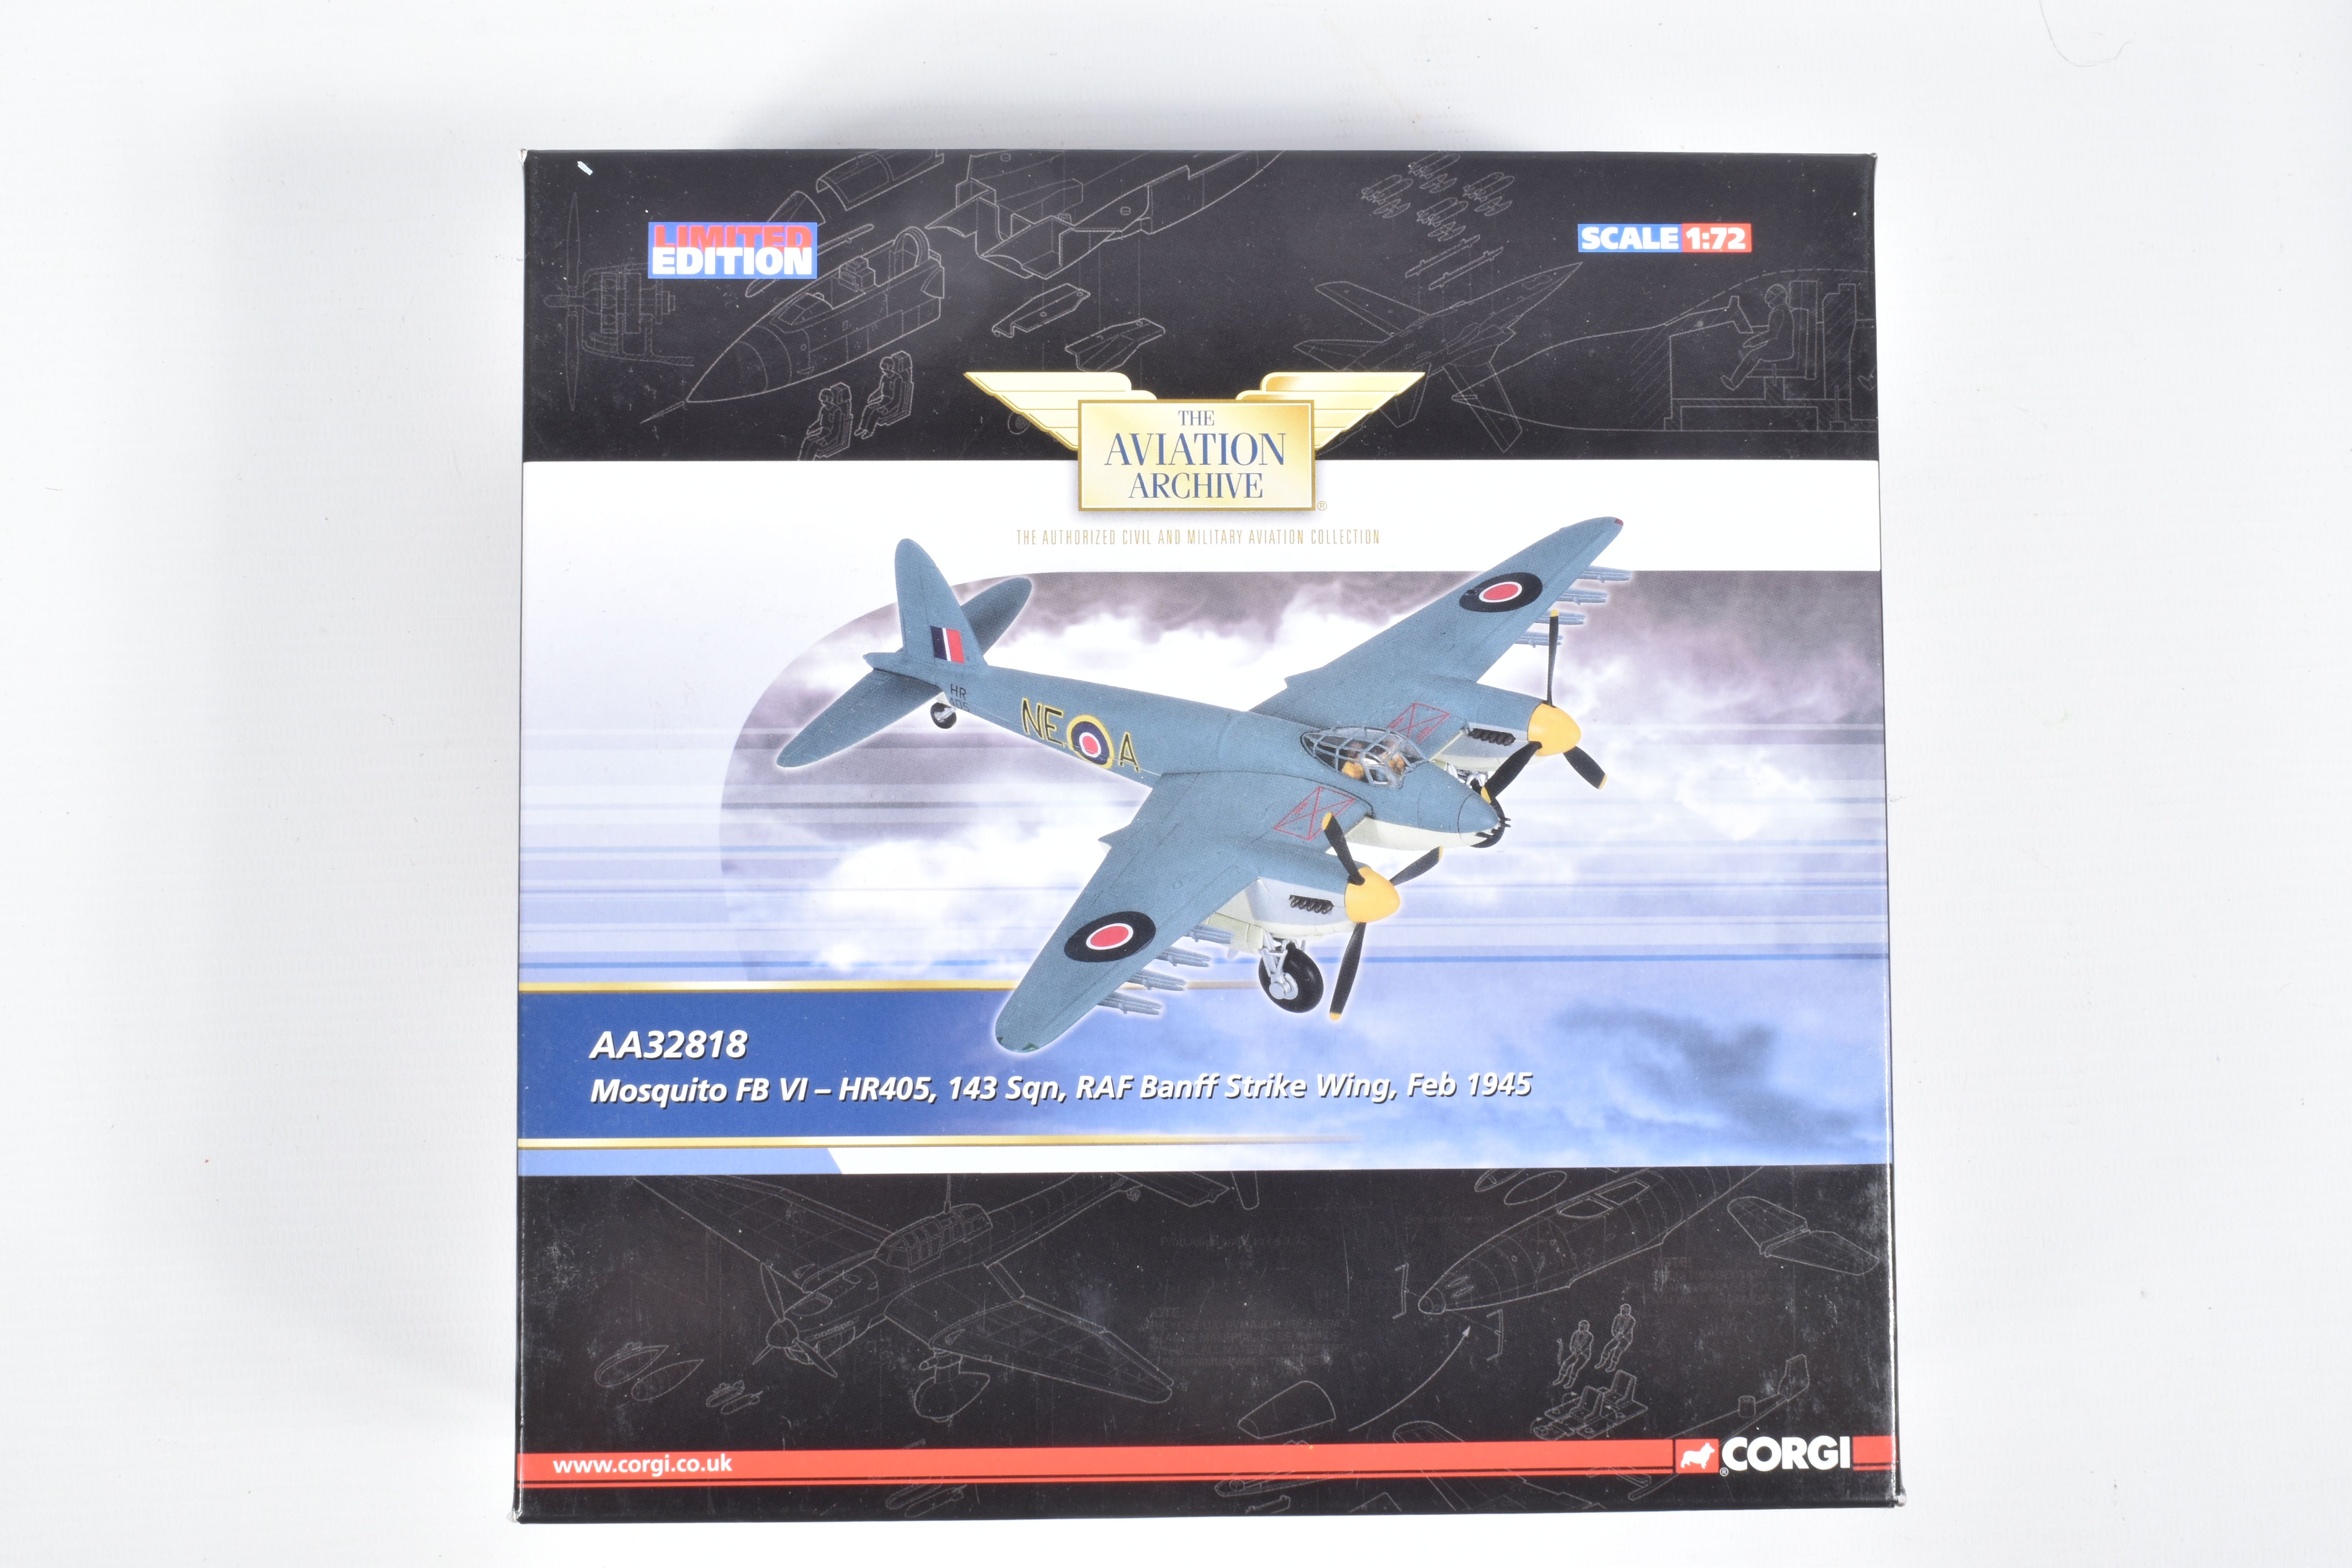 FOUR BOXED 1:27 SCALE LIMITED EDITION CORGI AVIATION ARCHIVE DIECAST MODEL AIRCRAFTS, the first is a - Image 8 of 9